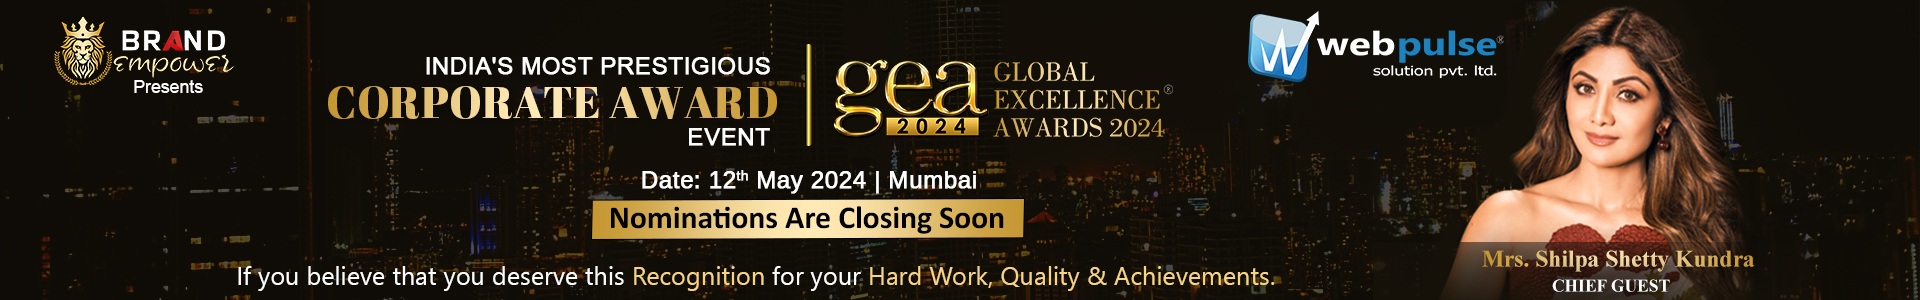 Global Excellence Awards 2024 in Mumbai